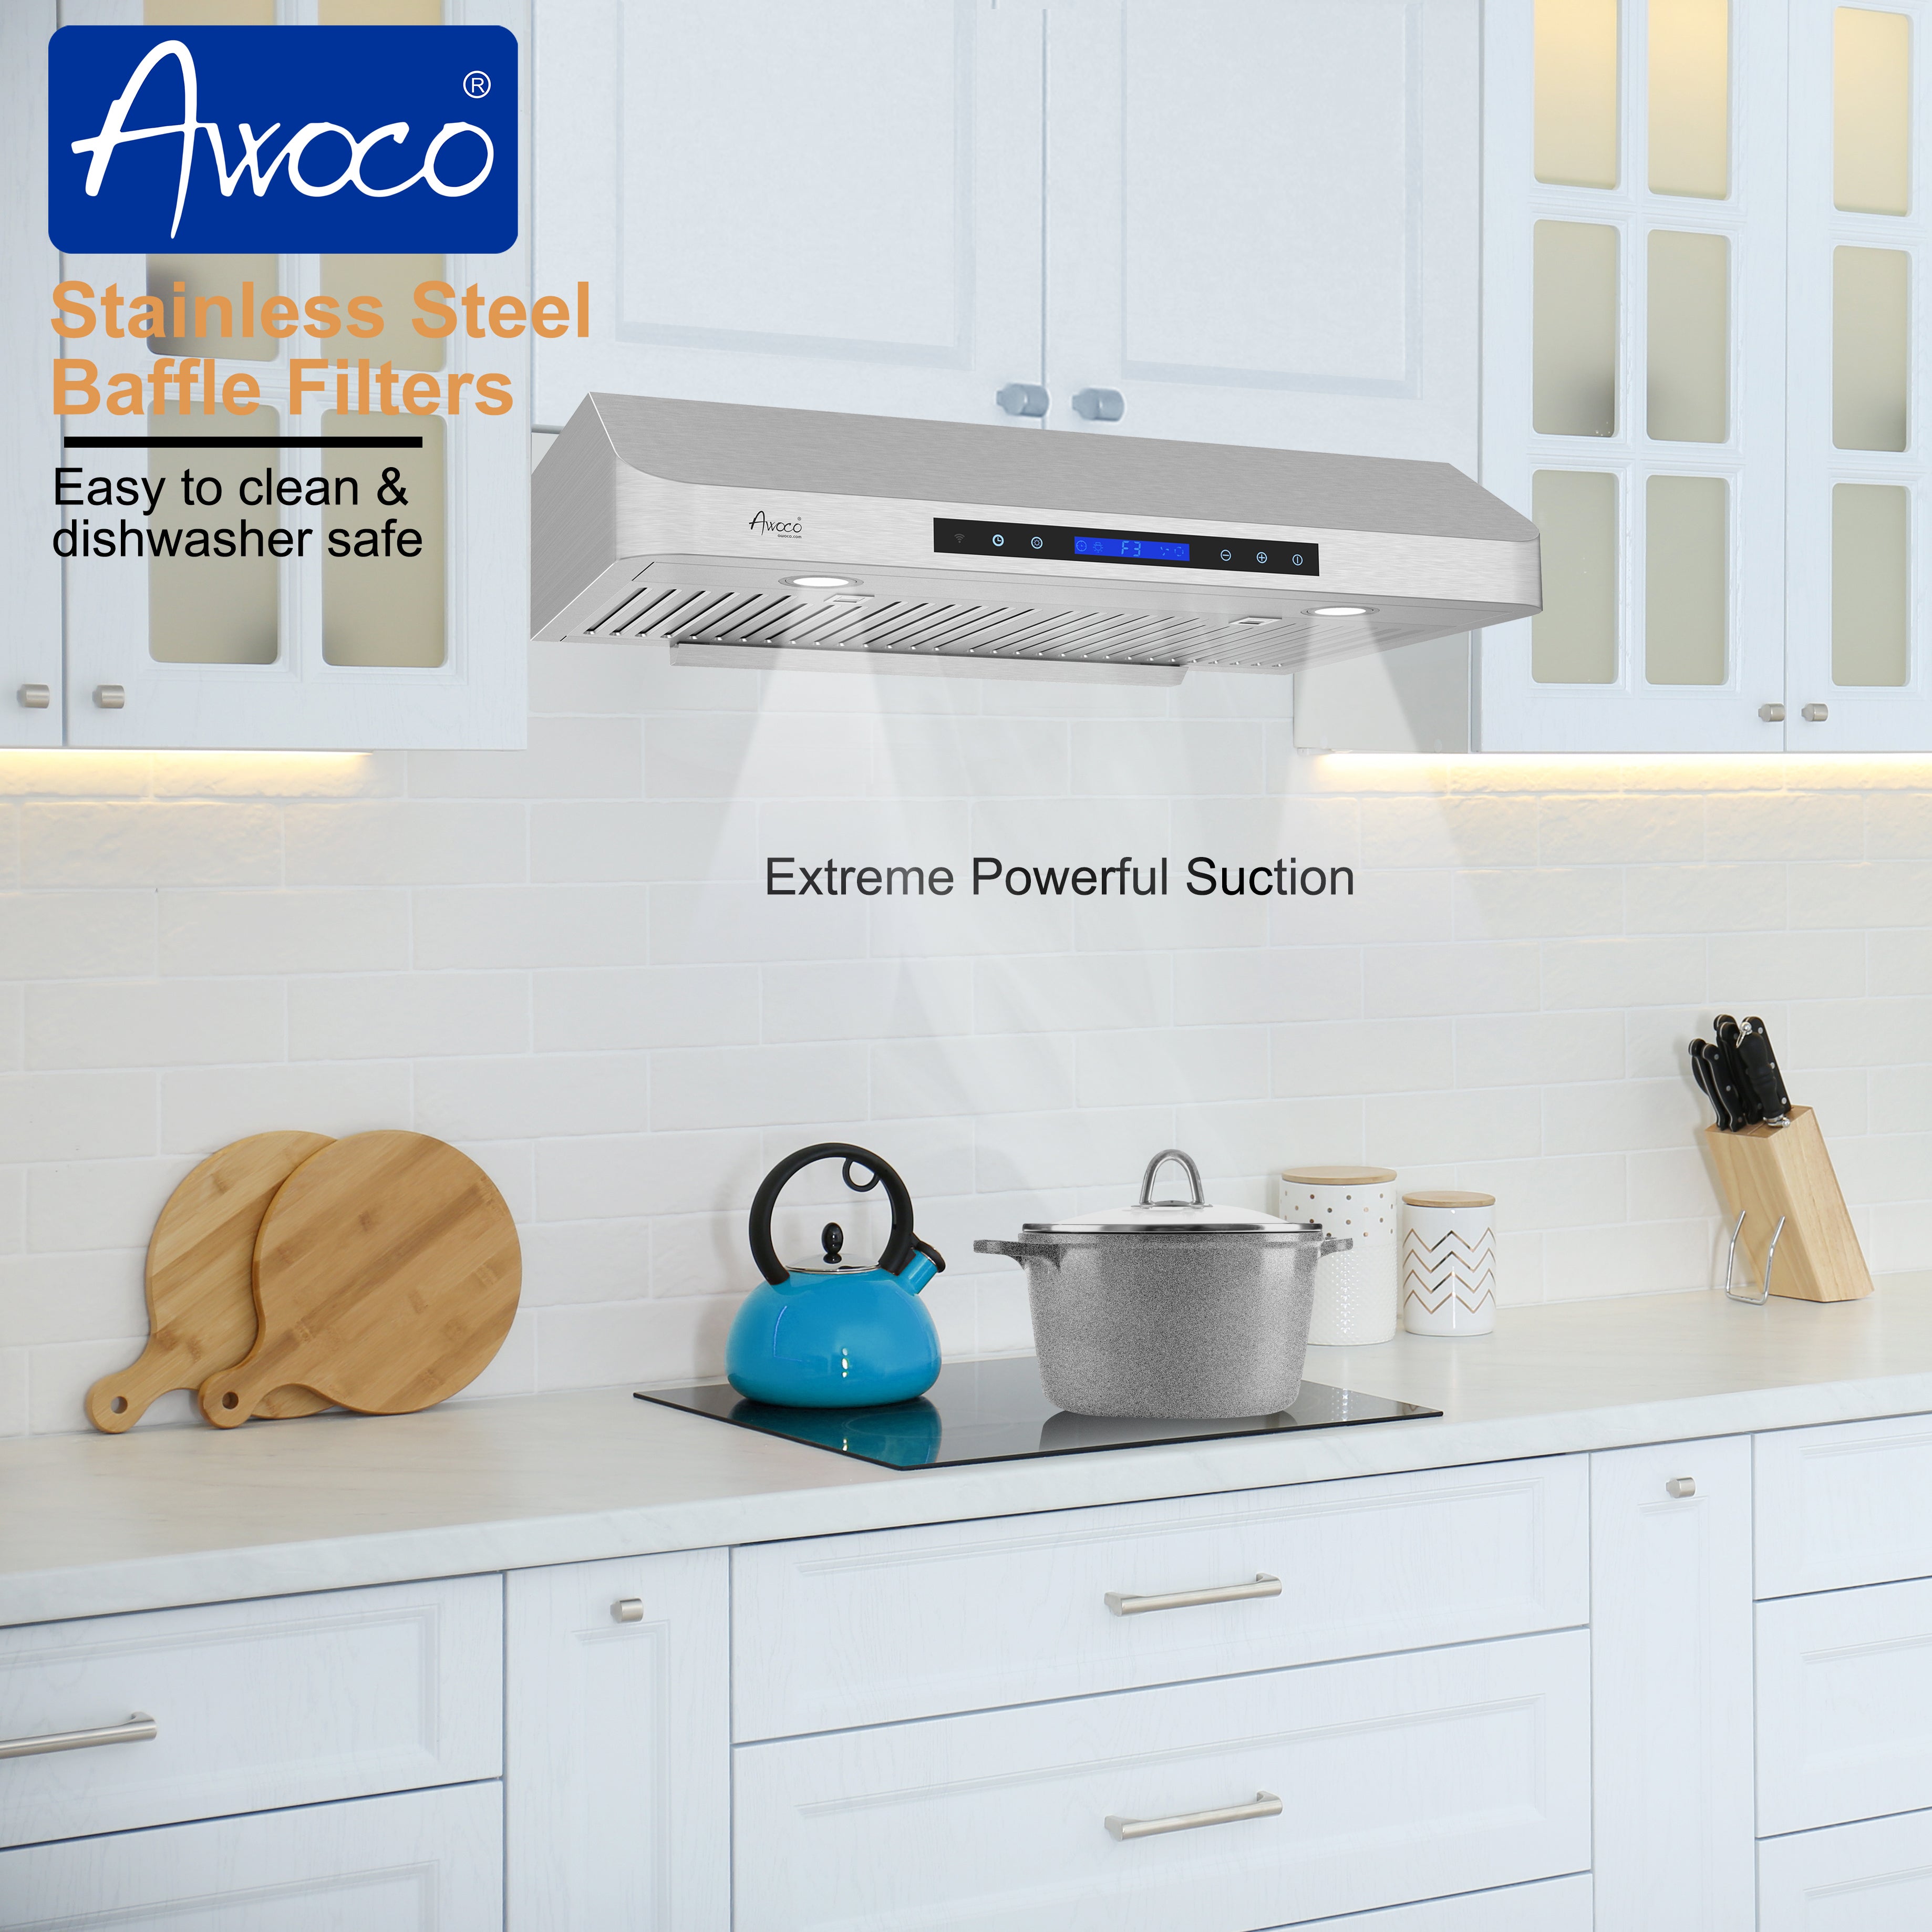 Awoco 29.8 900 CFM Ducted Under Cabinet Range Hood in Stainless Steel with Remote Control Included RH-C06-A30